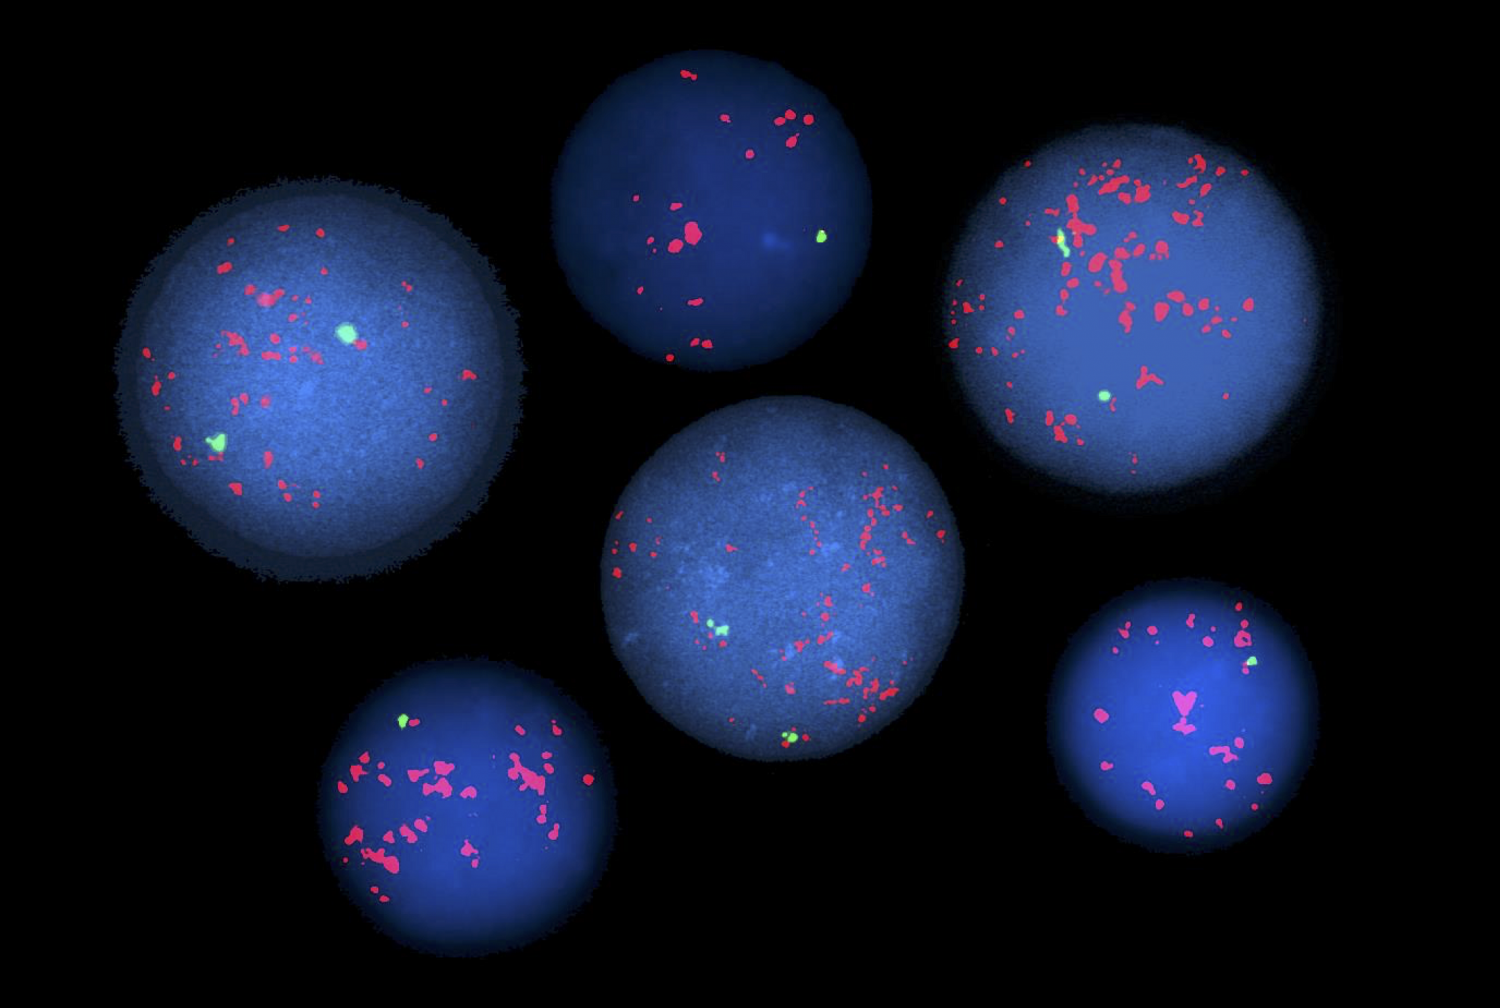 Image shows fluorescent chromosome staining revealing genetic abnormalities in blood cells. Photo credit: Dr. Susan Mathew